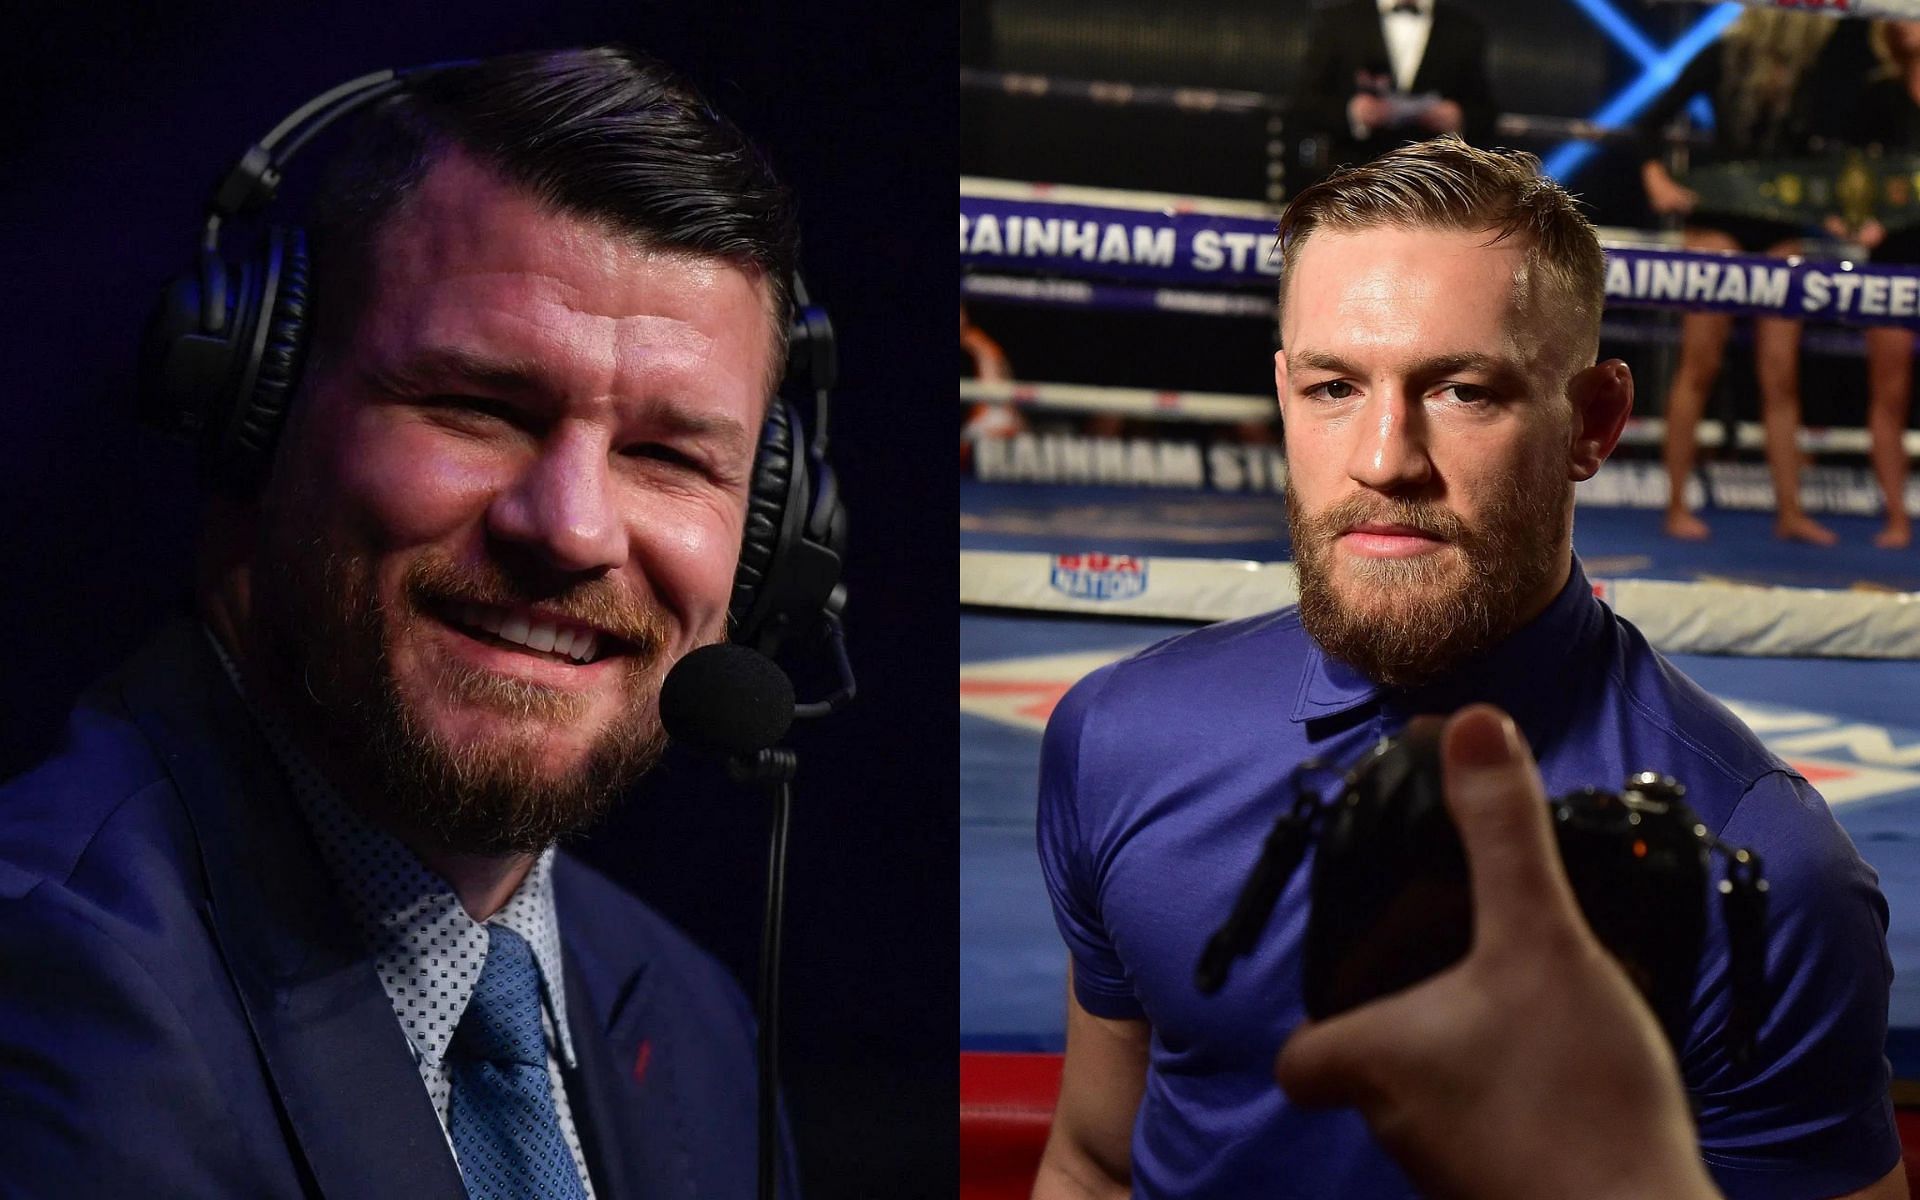 Michael Bisping (left) and Conor McGregor (right) [Images courtesy of Getty]